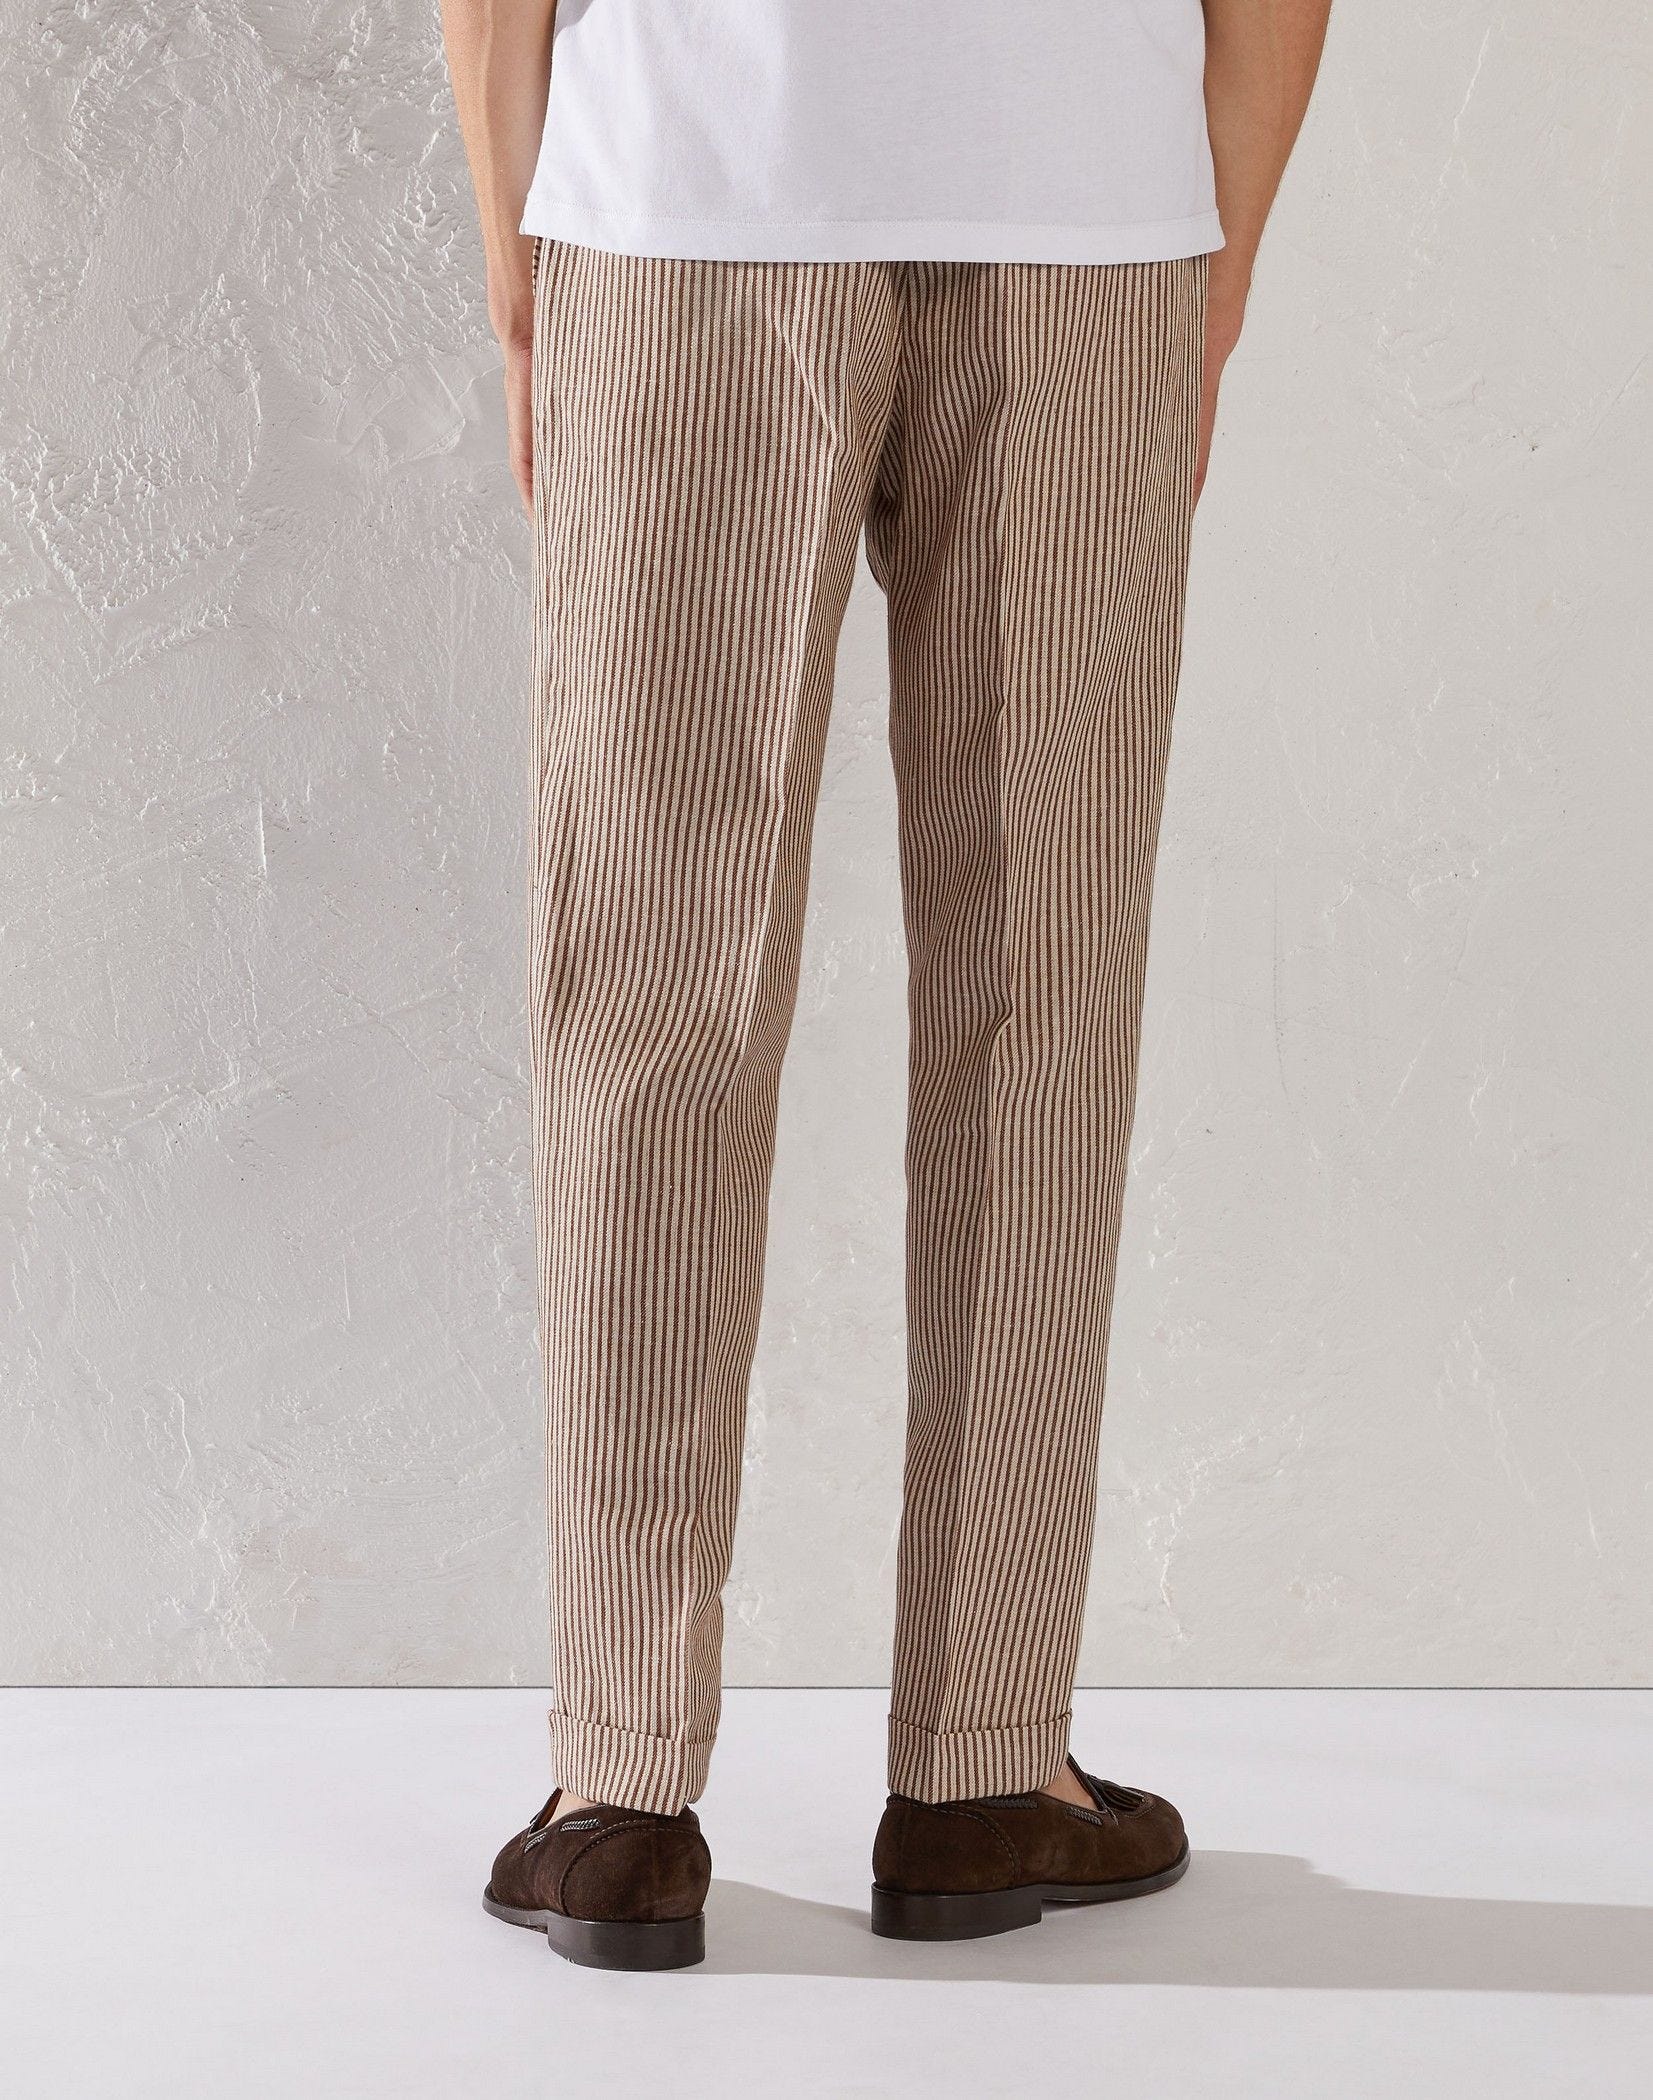 Casual two-tone striped cotton and linen trousers